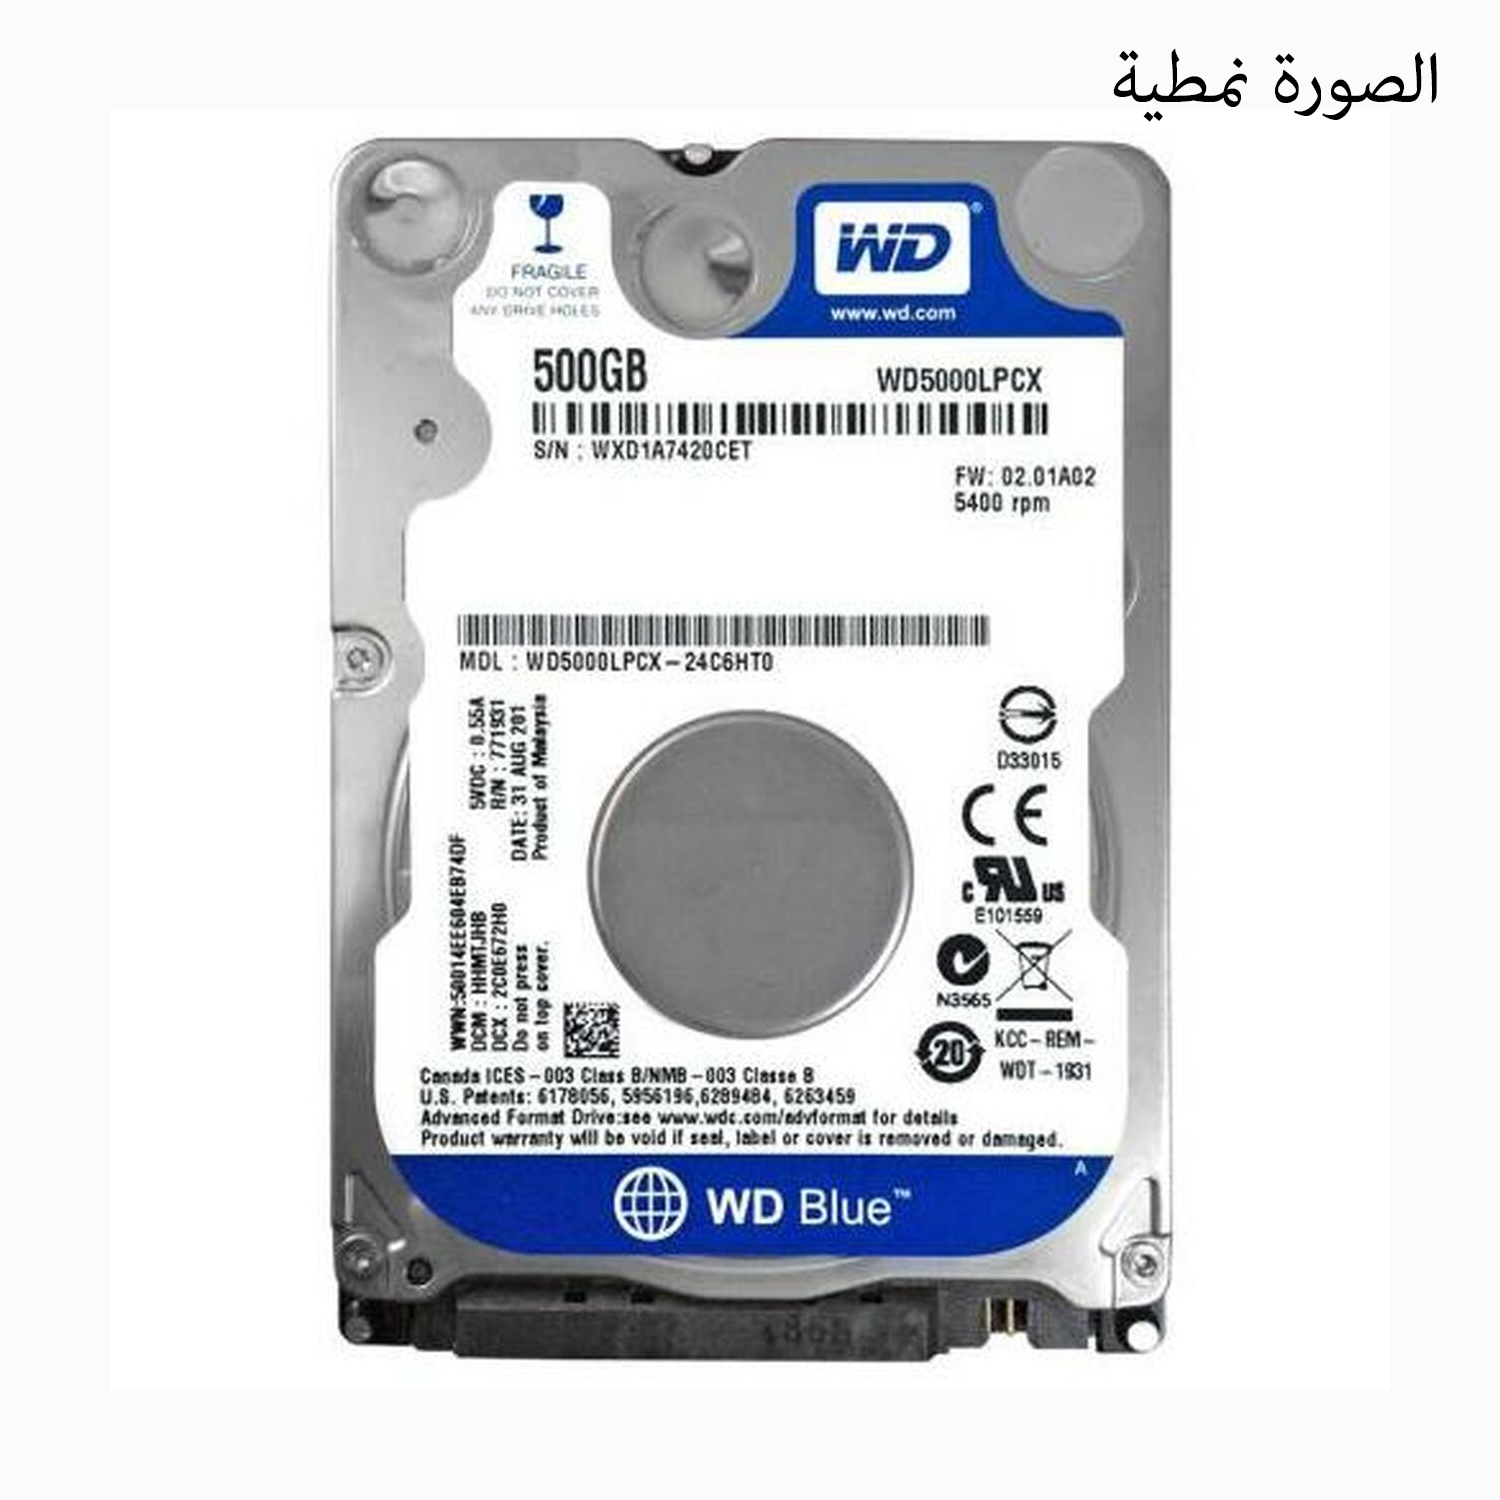 HDD 500GB WD SATA3 FOR NOTEBOOK 5400RPM مستعمل ,Laptop HDD